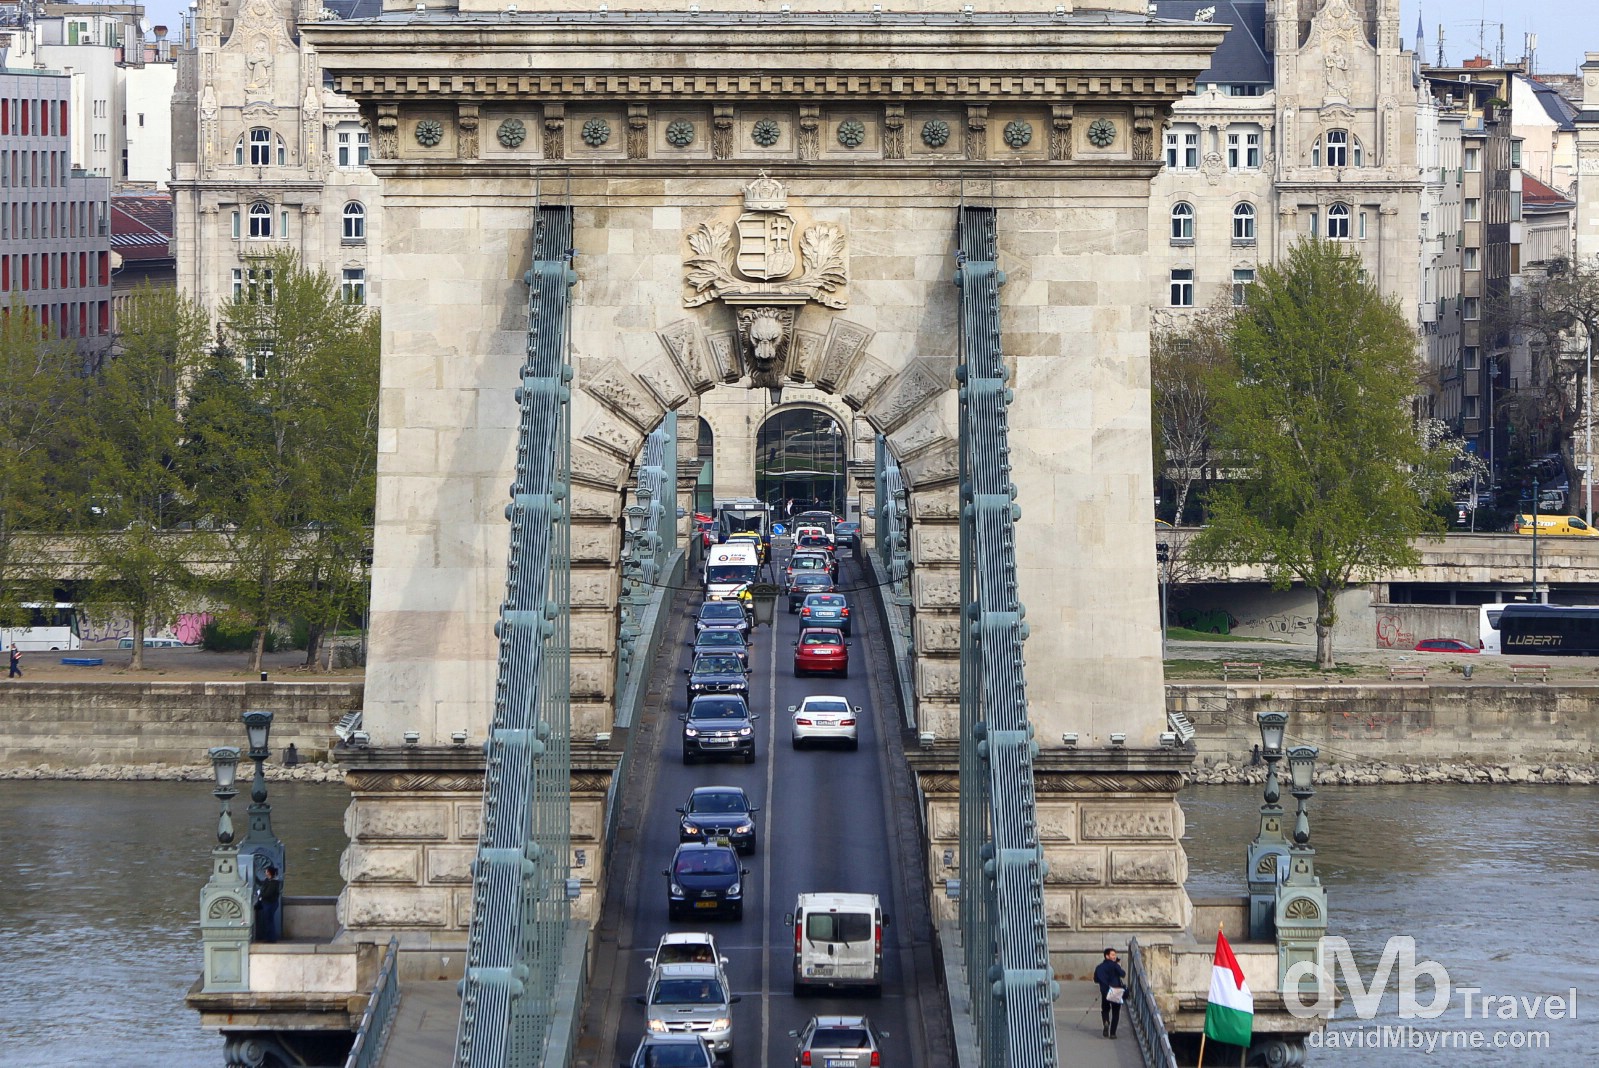 Traffic on the Chain Bridge spanning the Danube River in Budapest, Hungary. March 26th, 2014. 